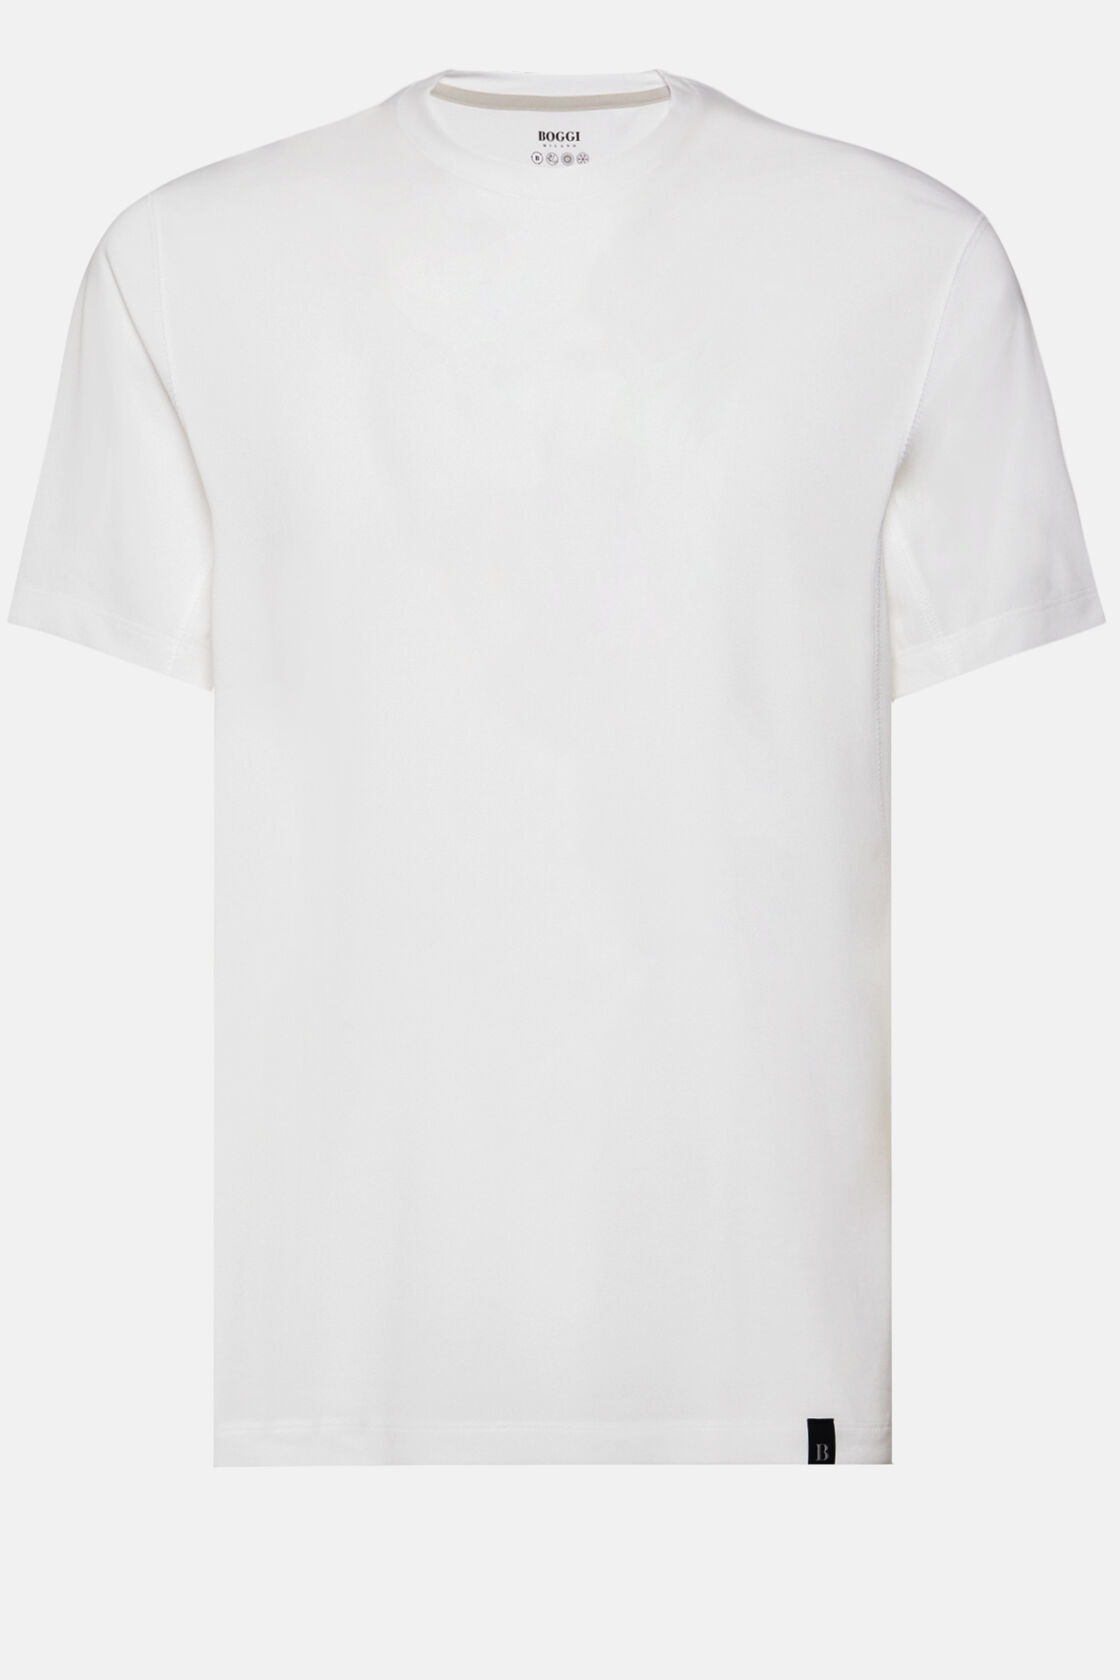 T-Shirt in Sustainable Performance Pique, White, hi-res